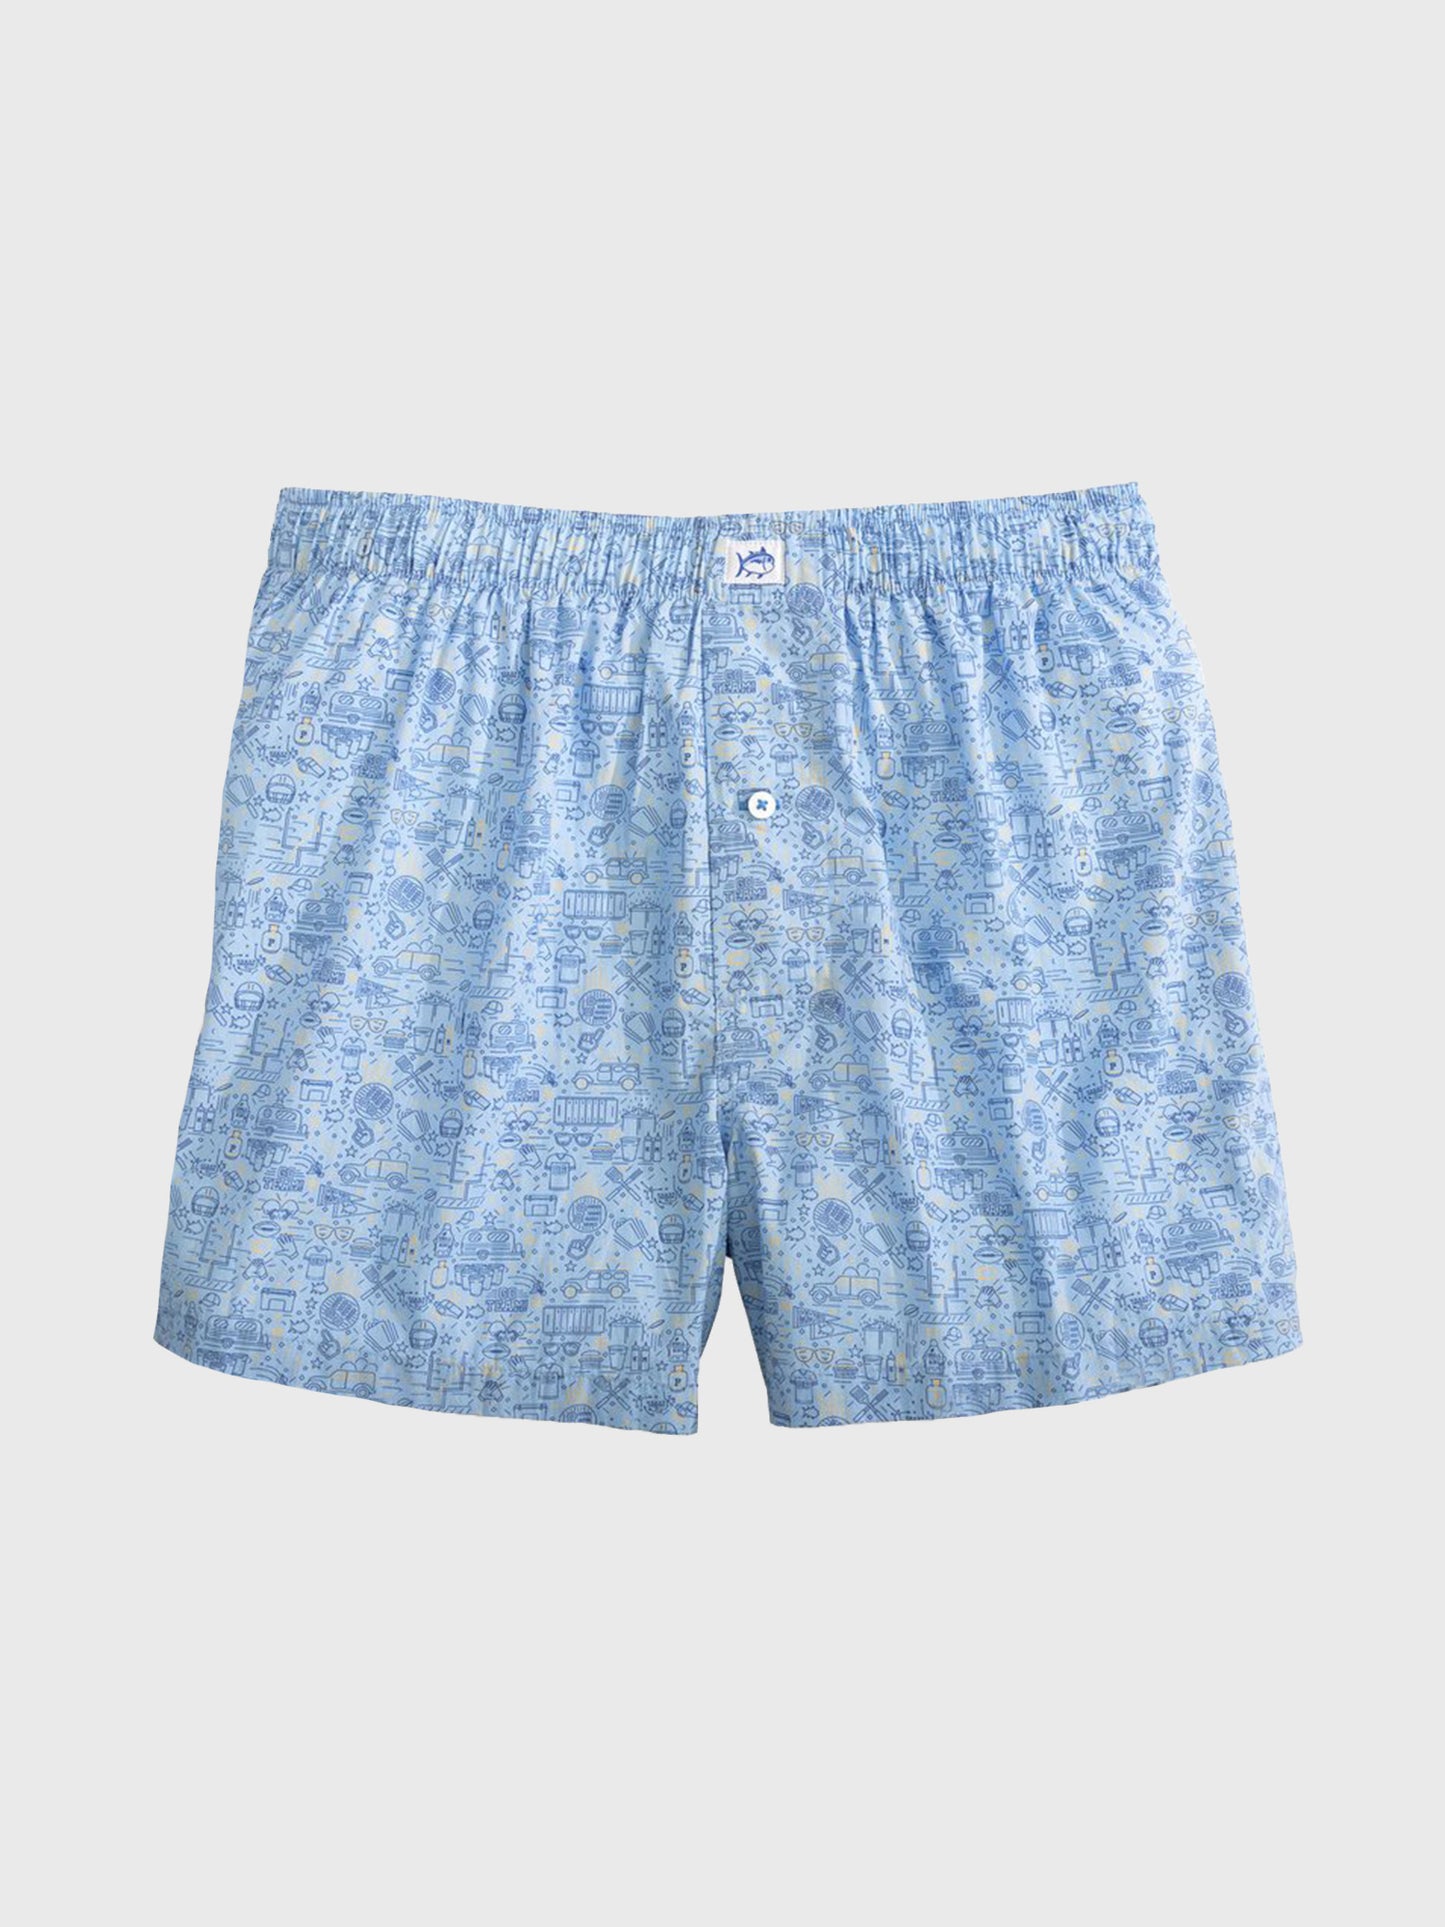 Southern Tide Men's Tailgate, Sleep, Repeat Boxer